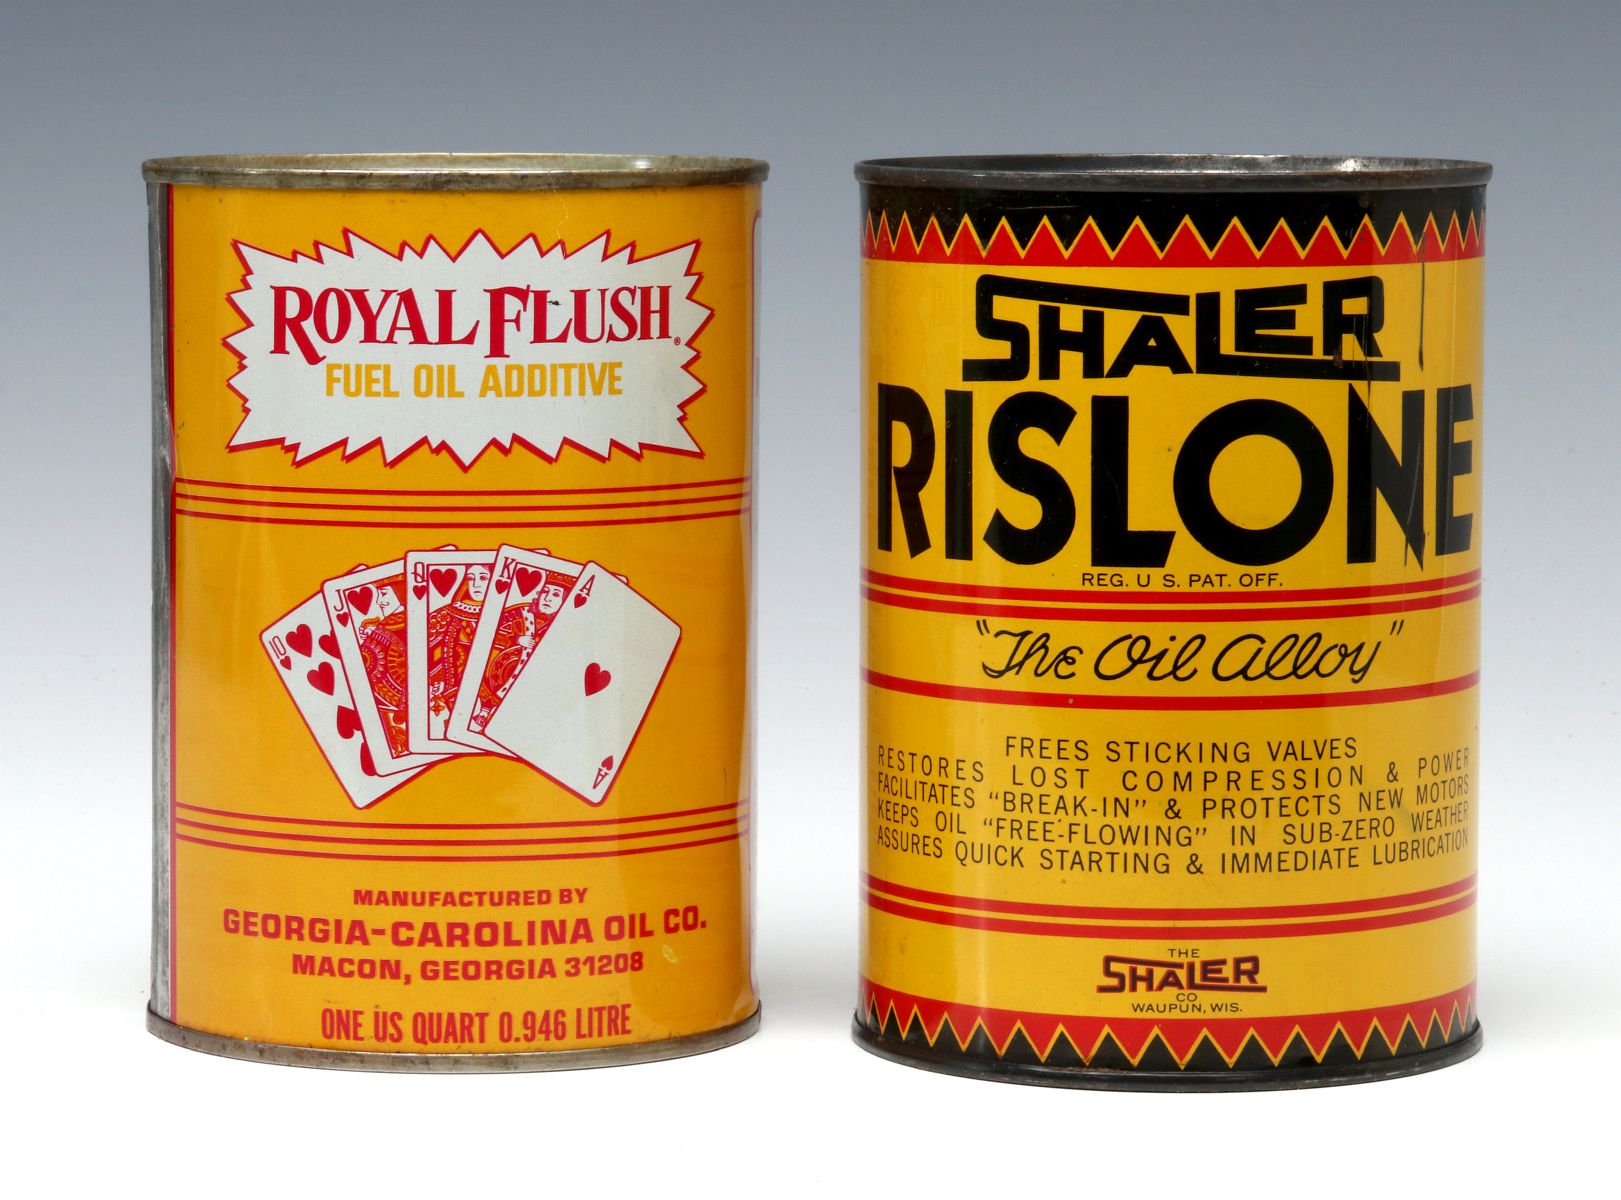 TWO VINTAGE AUTOMOTIVE PRODUCT CANS